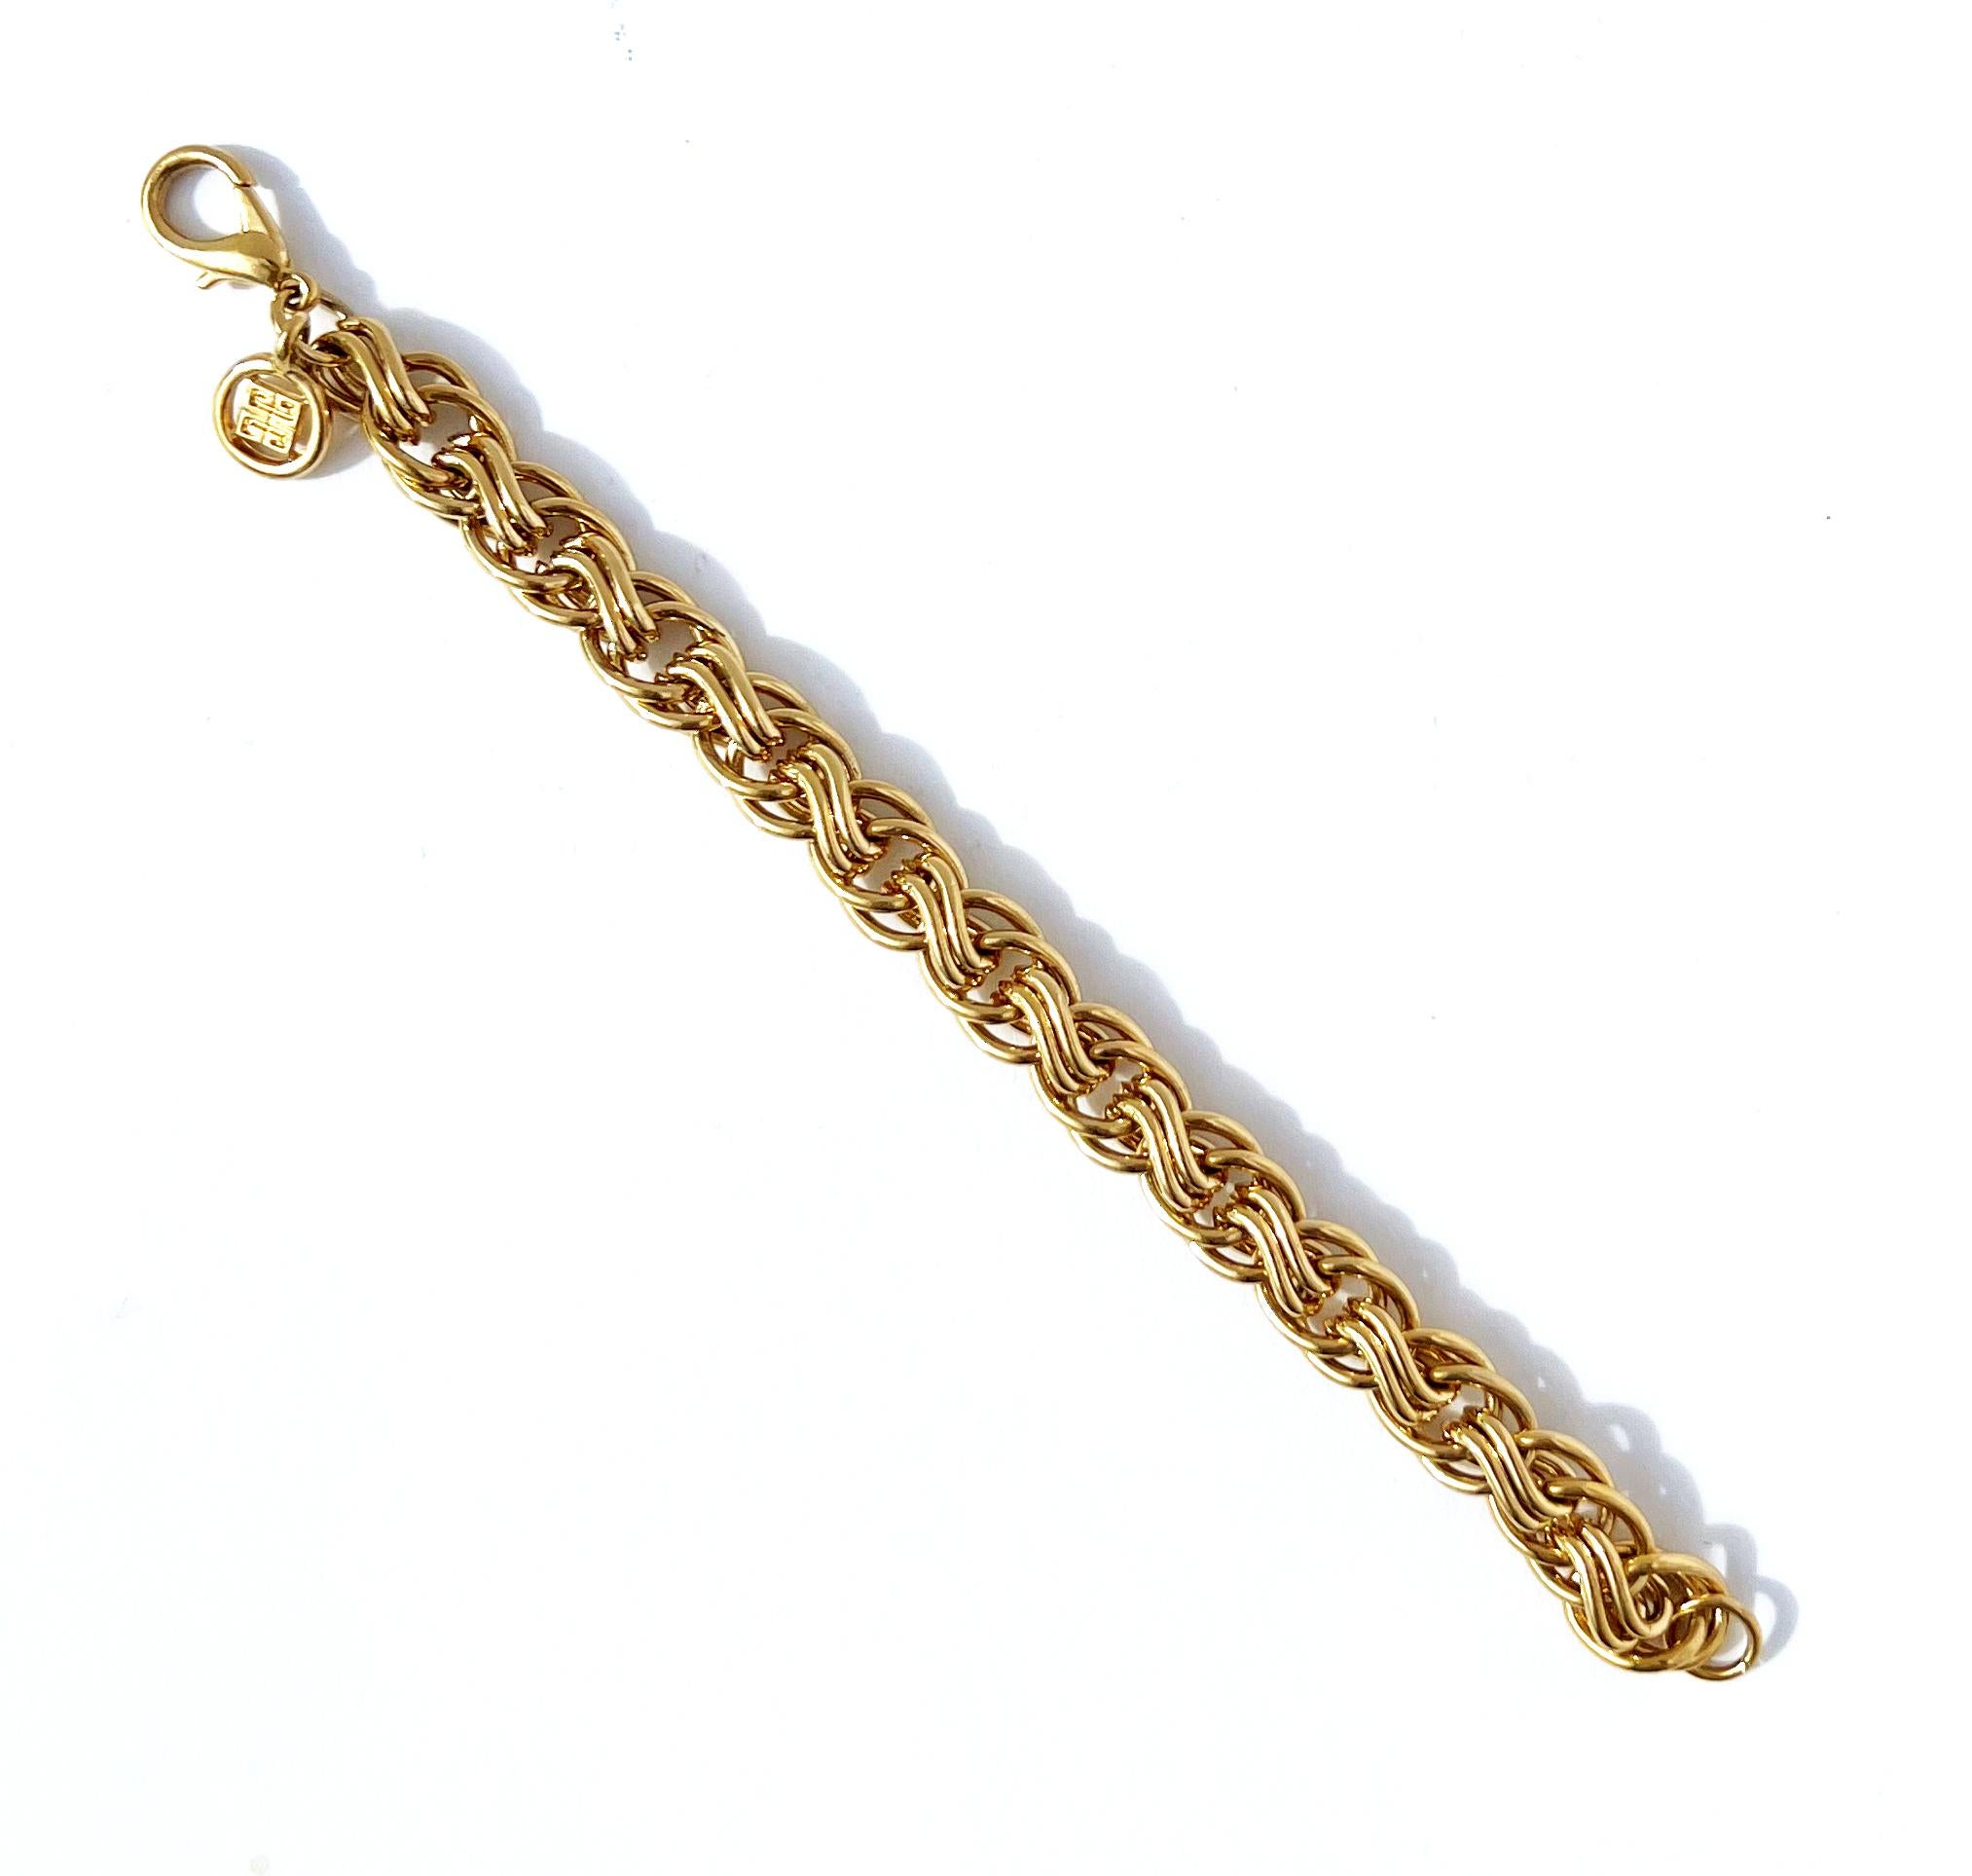 1980s Vintage Givenchy twisted link chain bracelet in gold plate.  This vintage bracelet features a a double set of interlocking twisted links for an appealing chunky effect.  Bracelet measures 7 1/4 inches in length, width just under half an inch